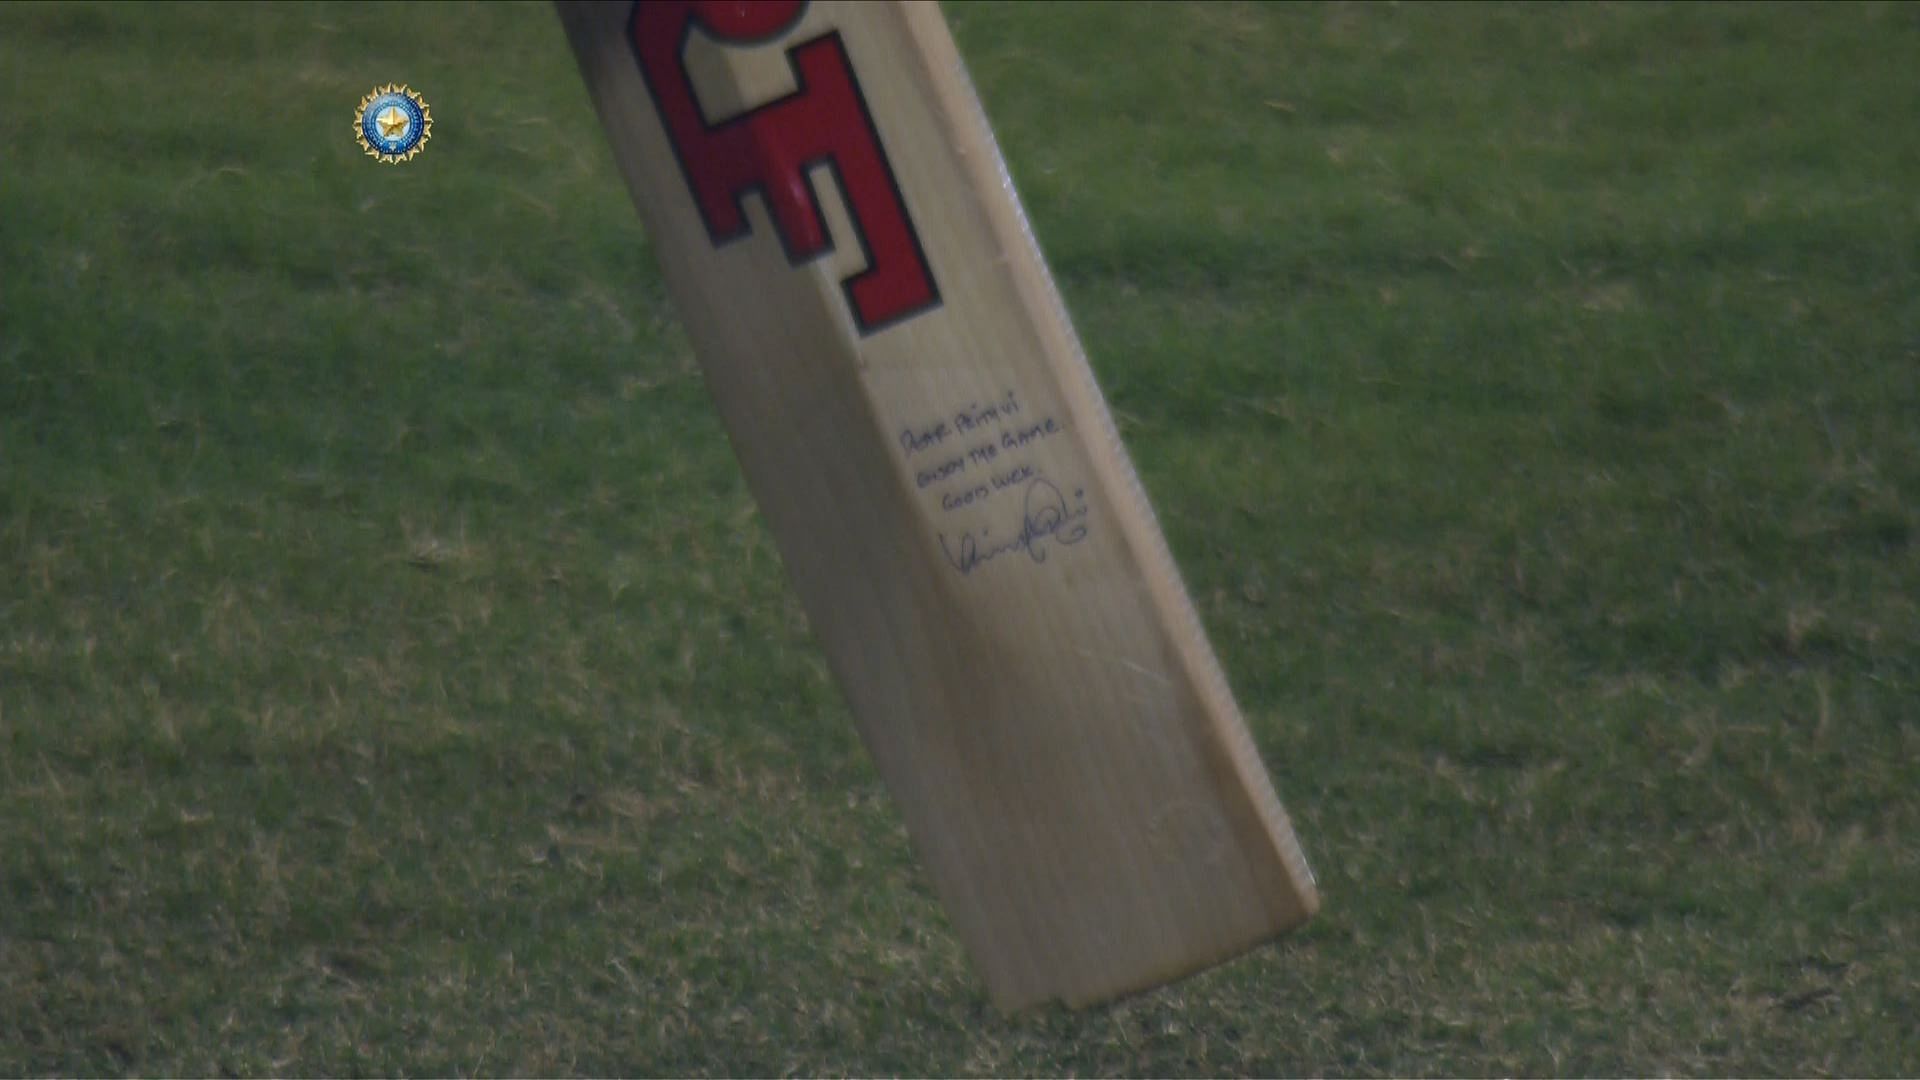 Prithvi Shaw’s bat had a message and an autograph from Indian skipper Virat Kohli.